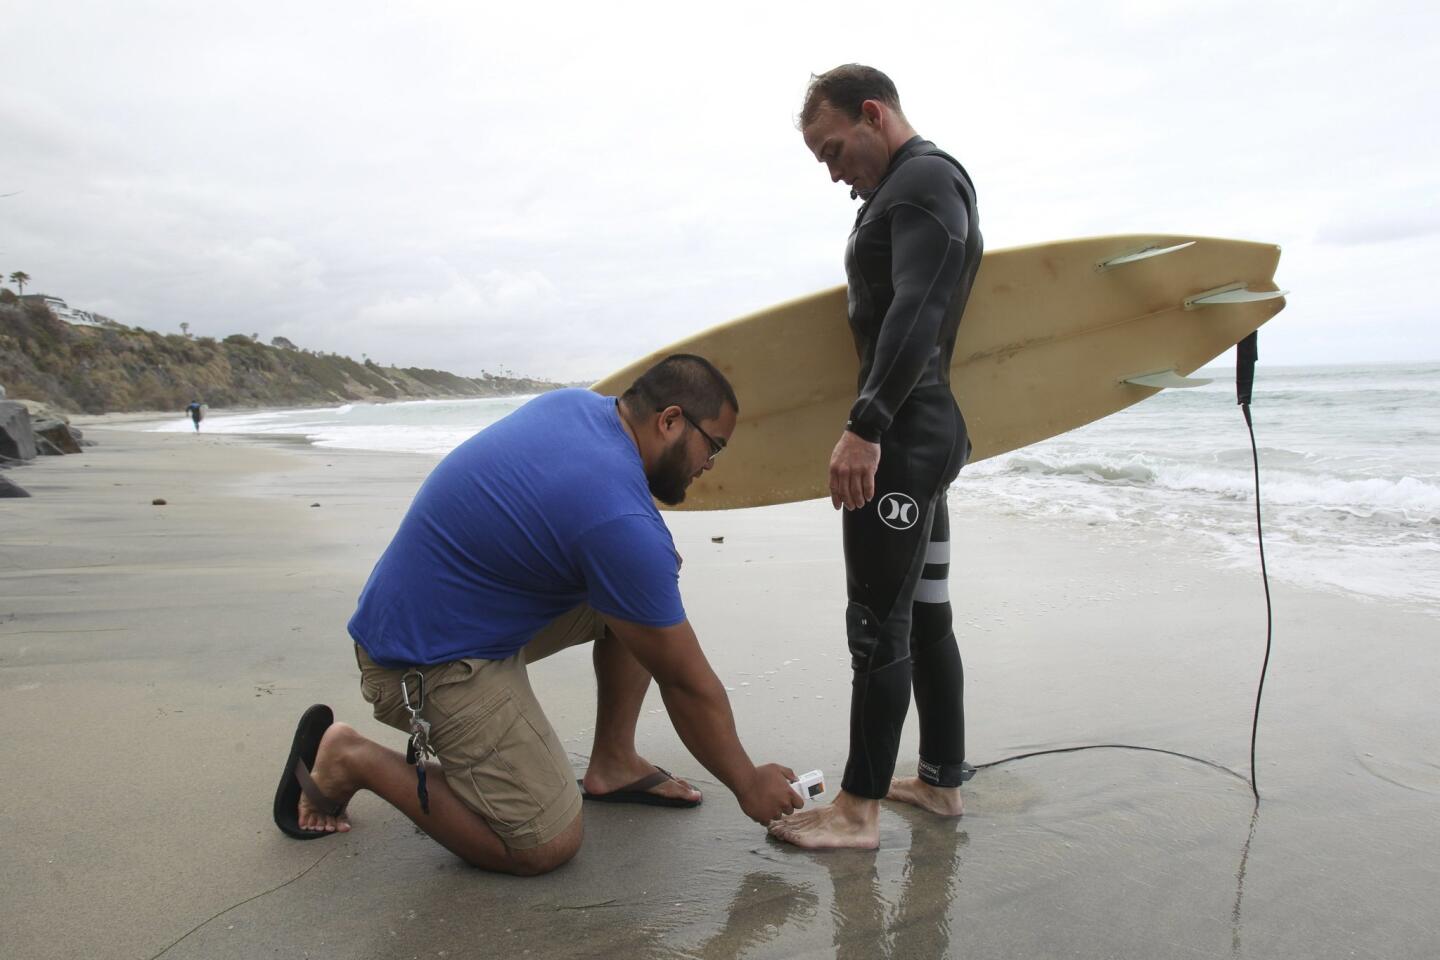 Kinesiology student Alvin Padilla, 24, takes a temperature reading of surfer James Petracca's foot, who volunteered to participate in a wetsuit study by Cal State University San Marcos students, just after he got out of the water.